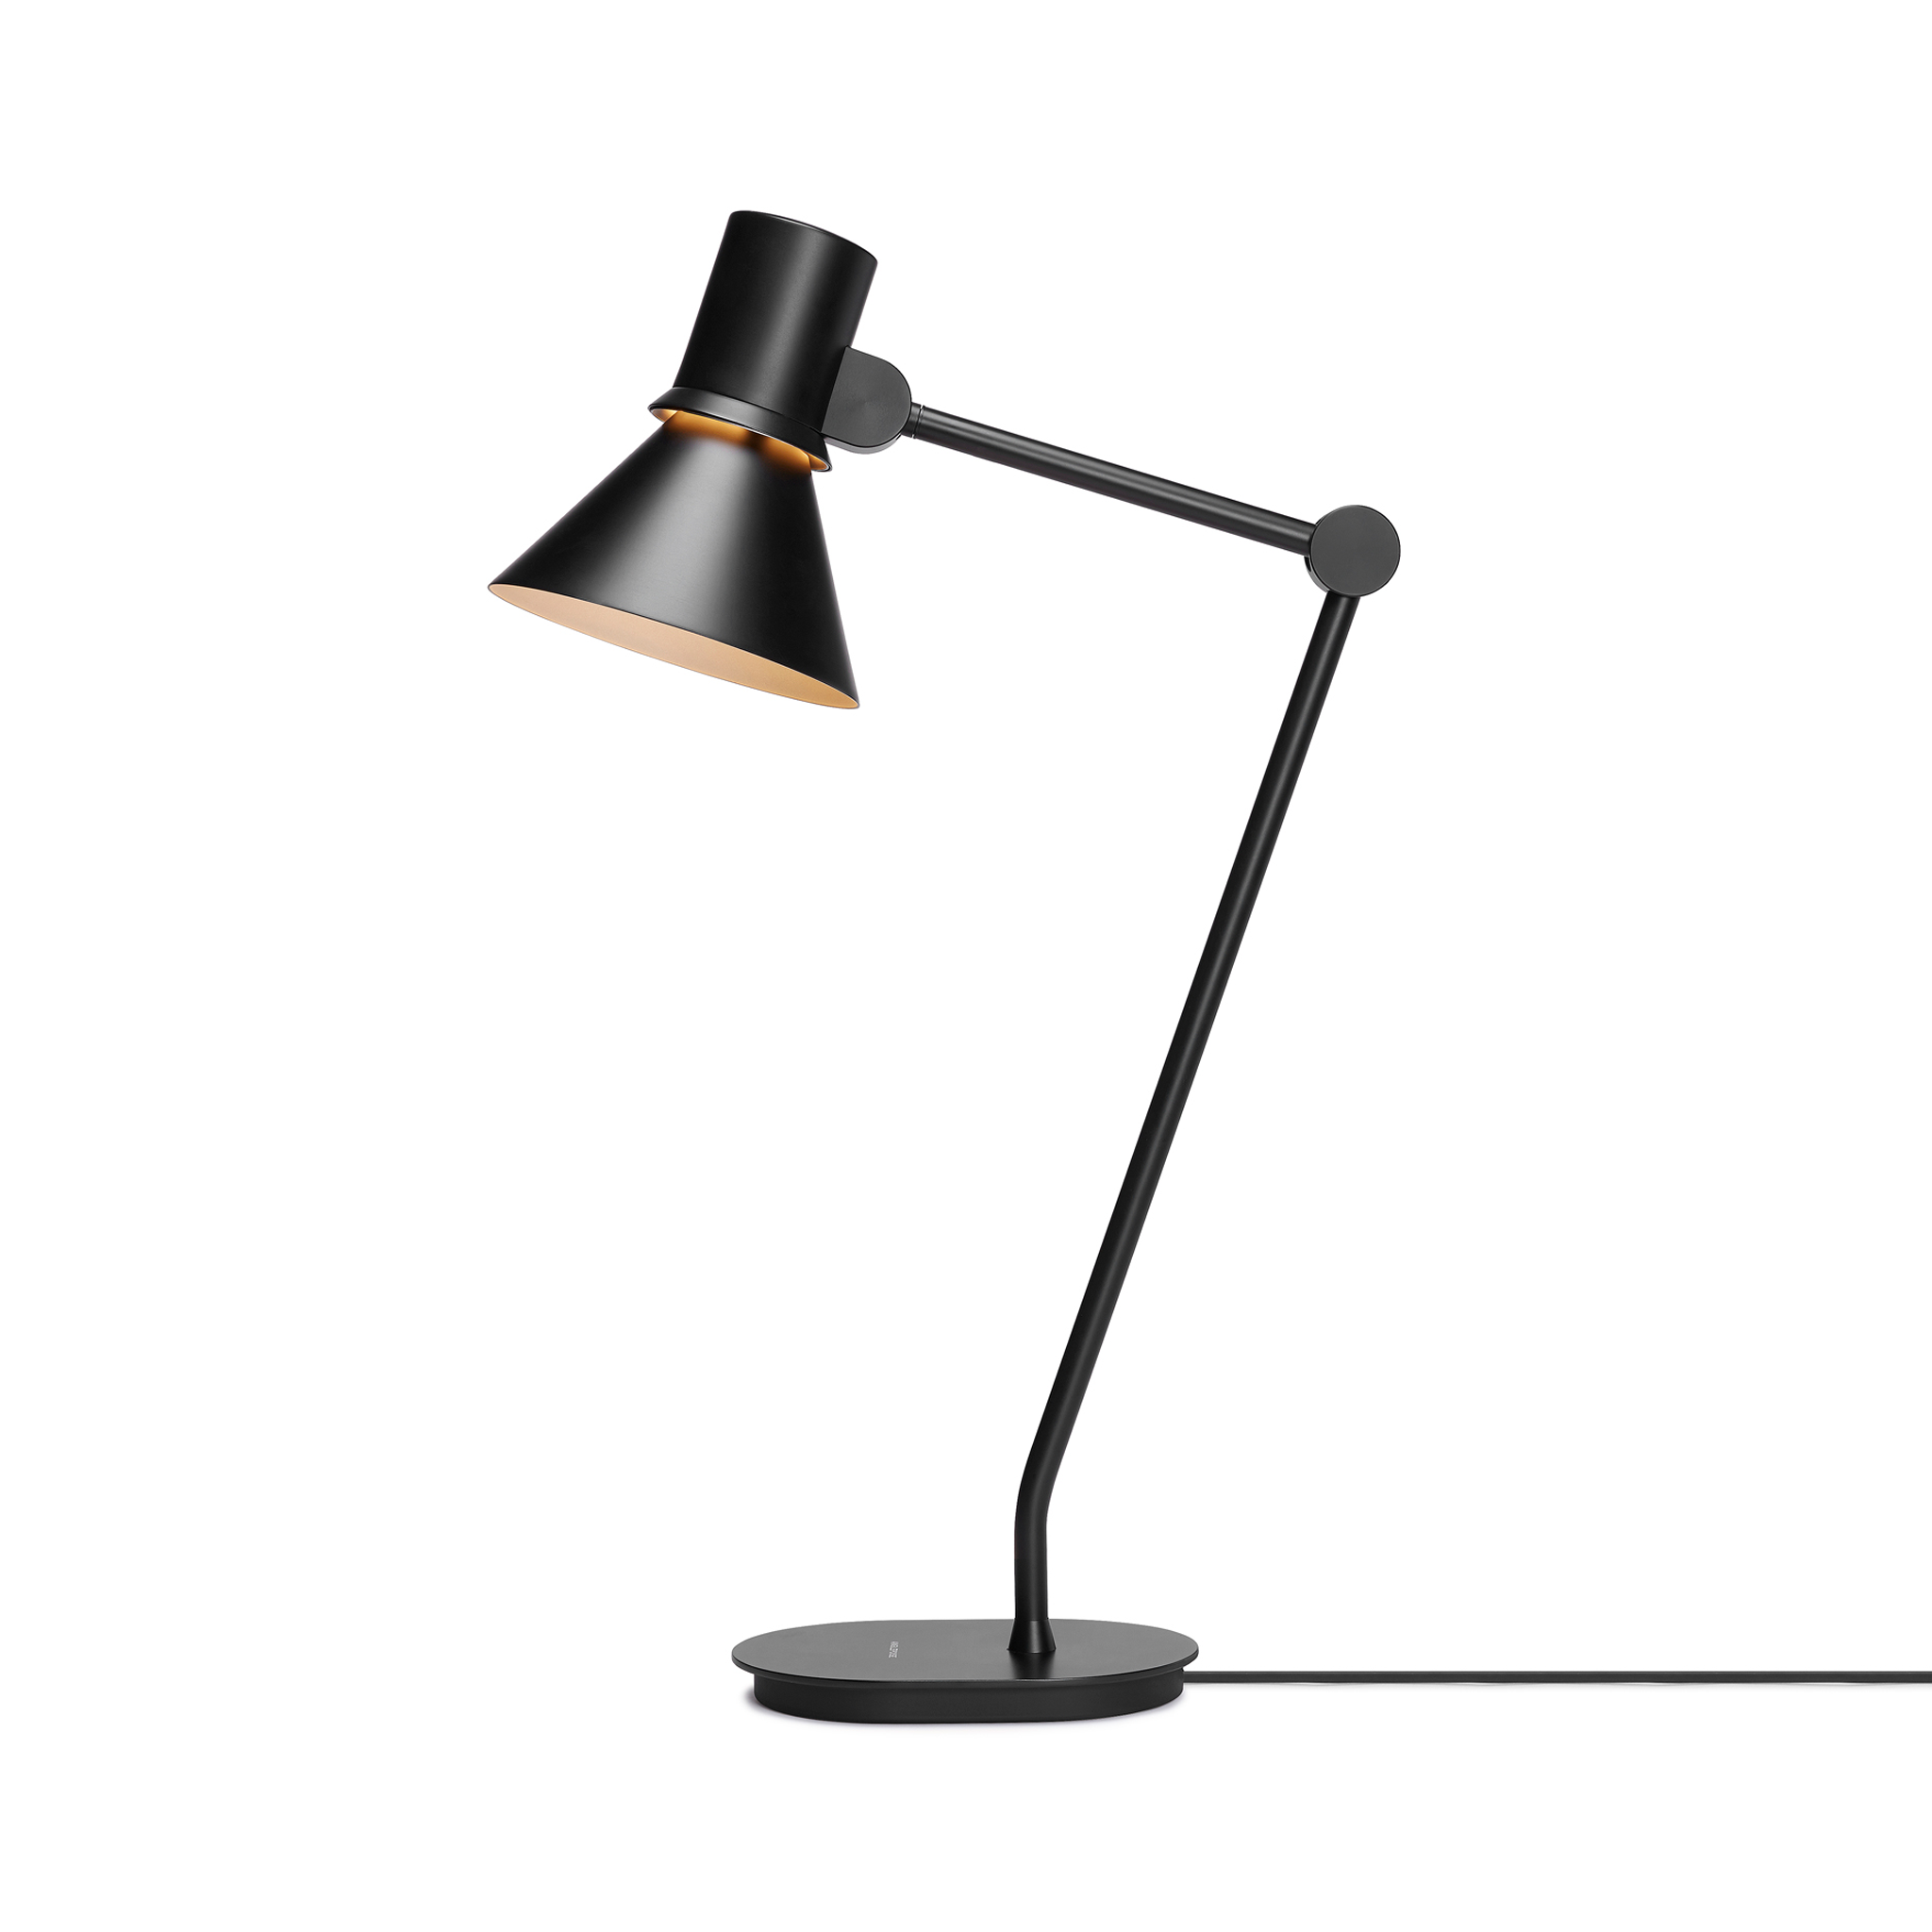 Type 80 Table Lamp by Kenneth Grange for Anglepoise